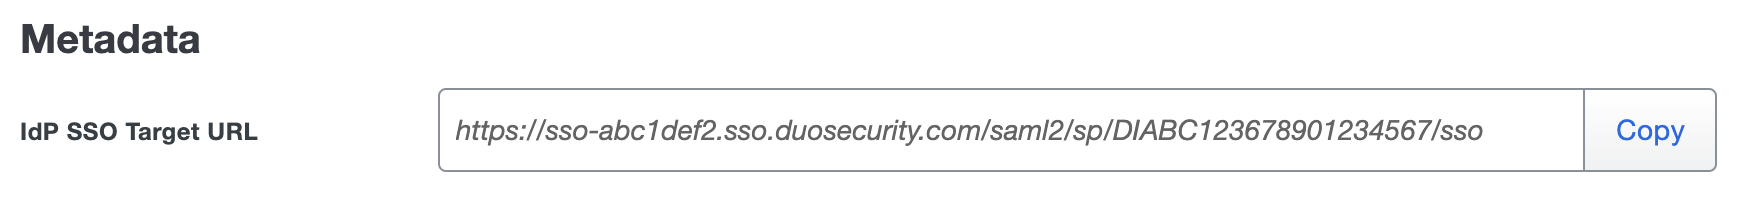 Duo KnowBe4 IdP SSO Target URL